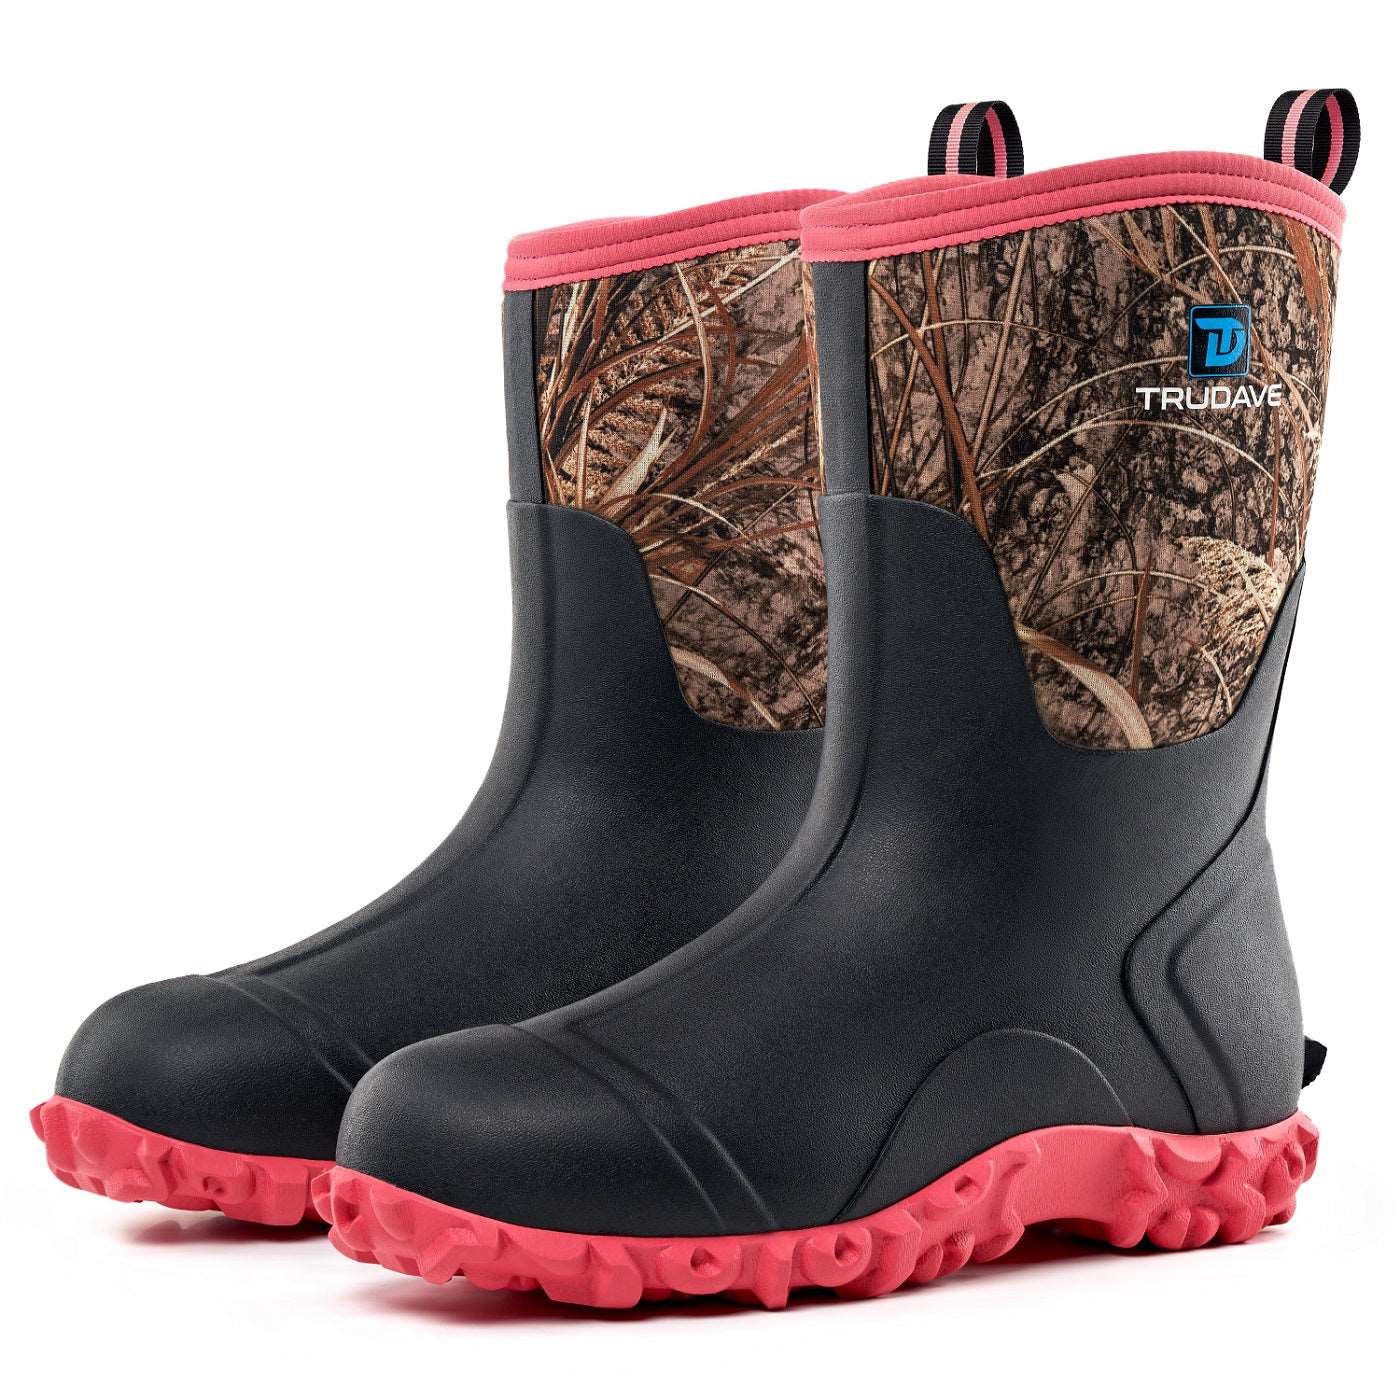 Trudave Pink Camo Rubber Rain Boots for Women